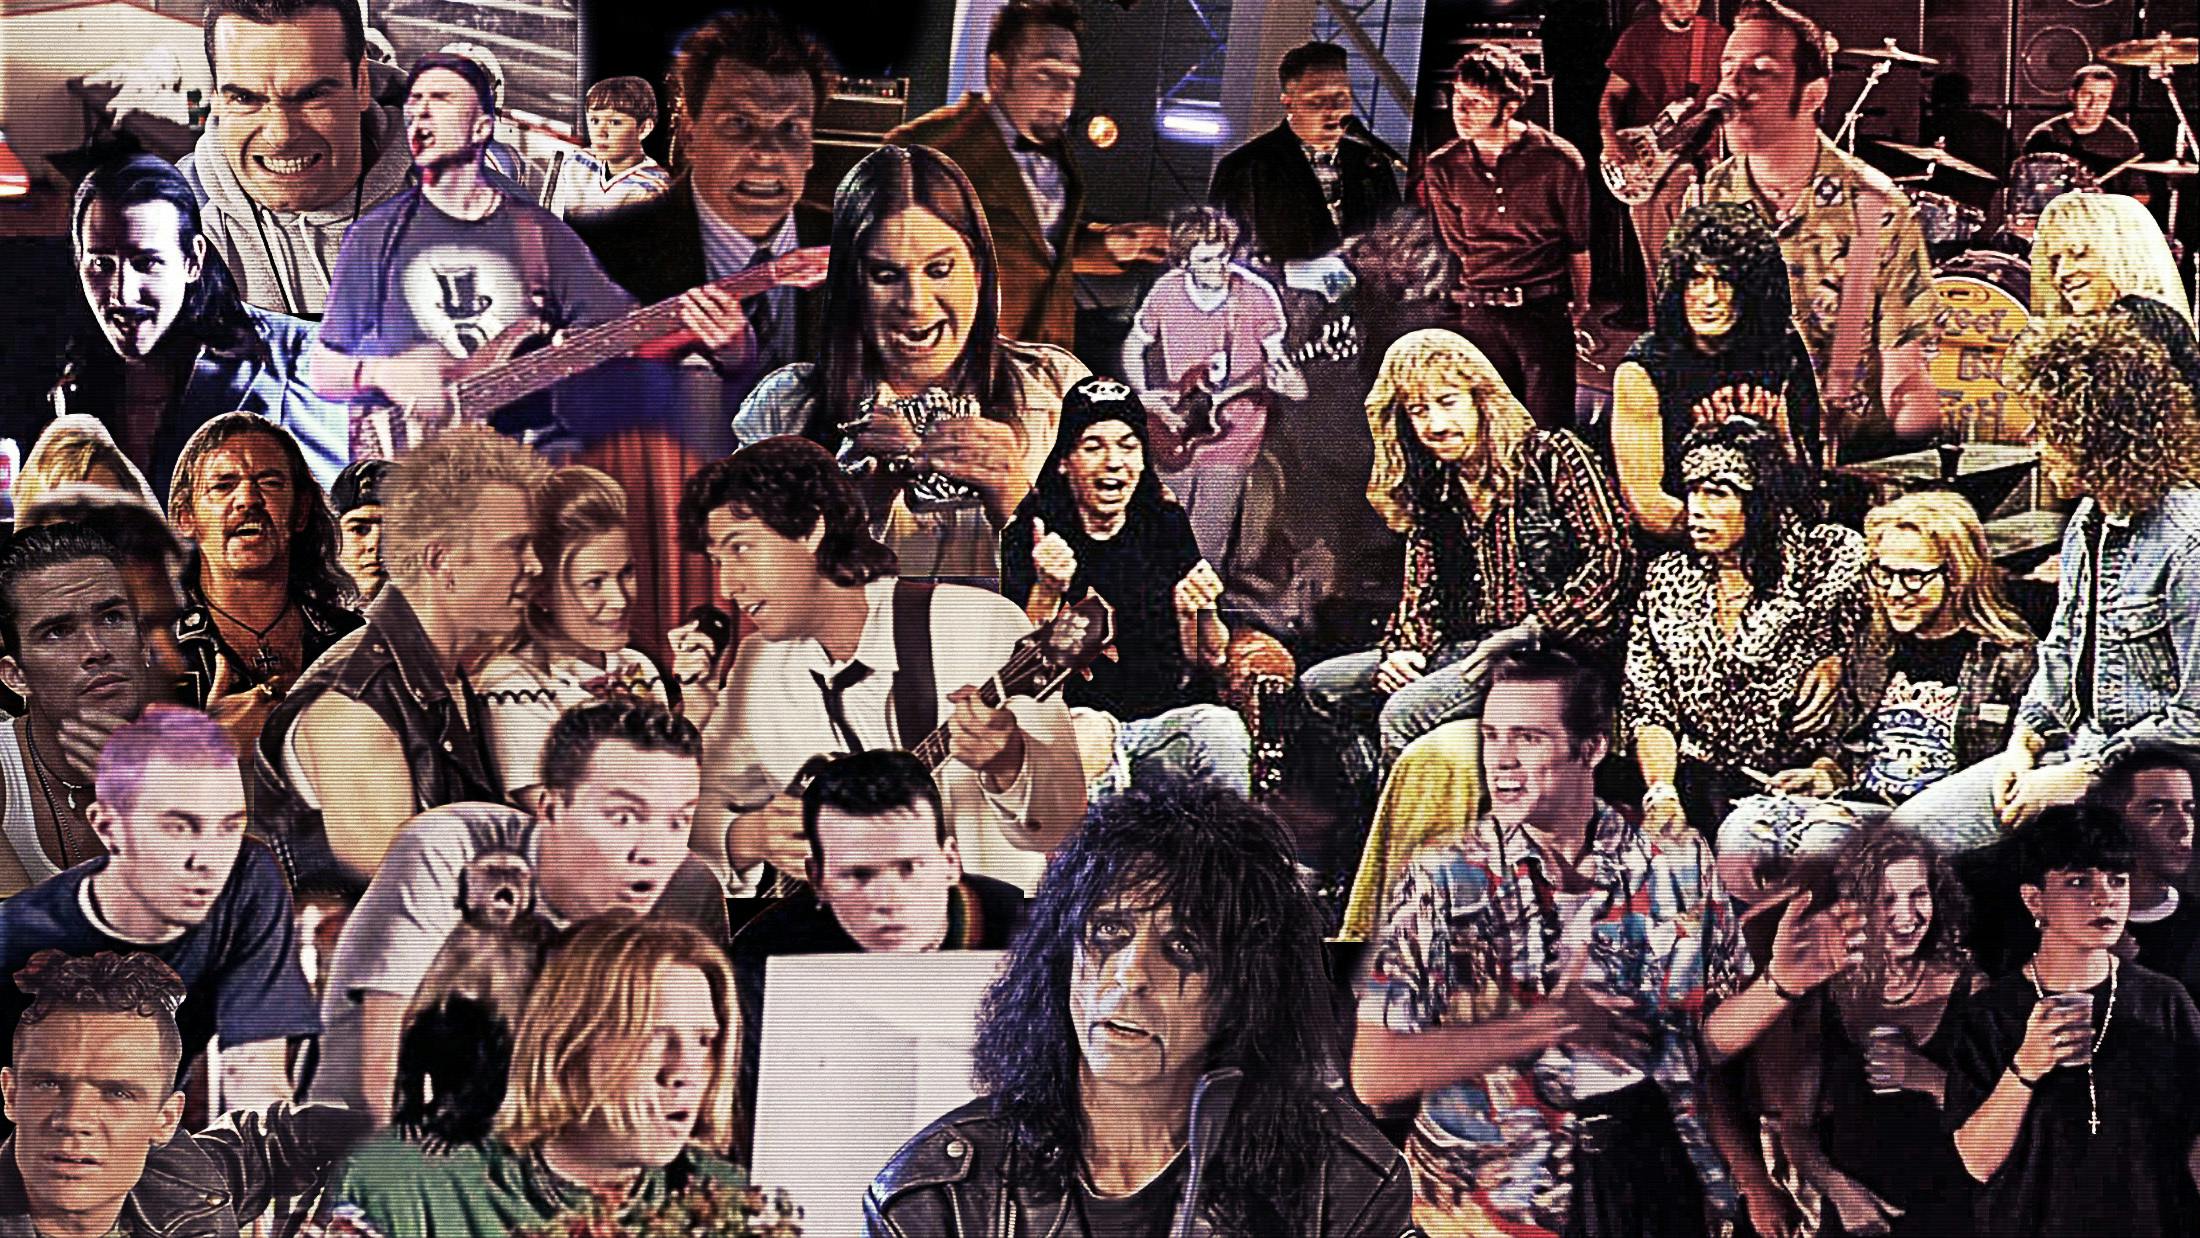 Every time a band showed up in '90s movies